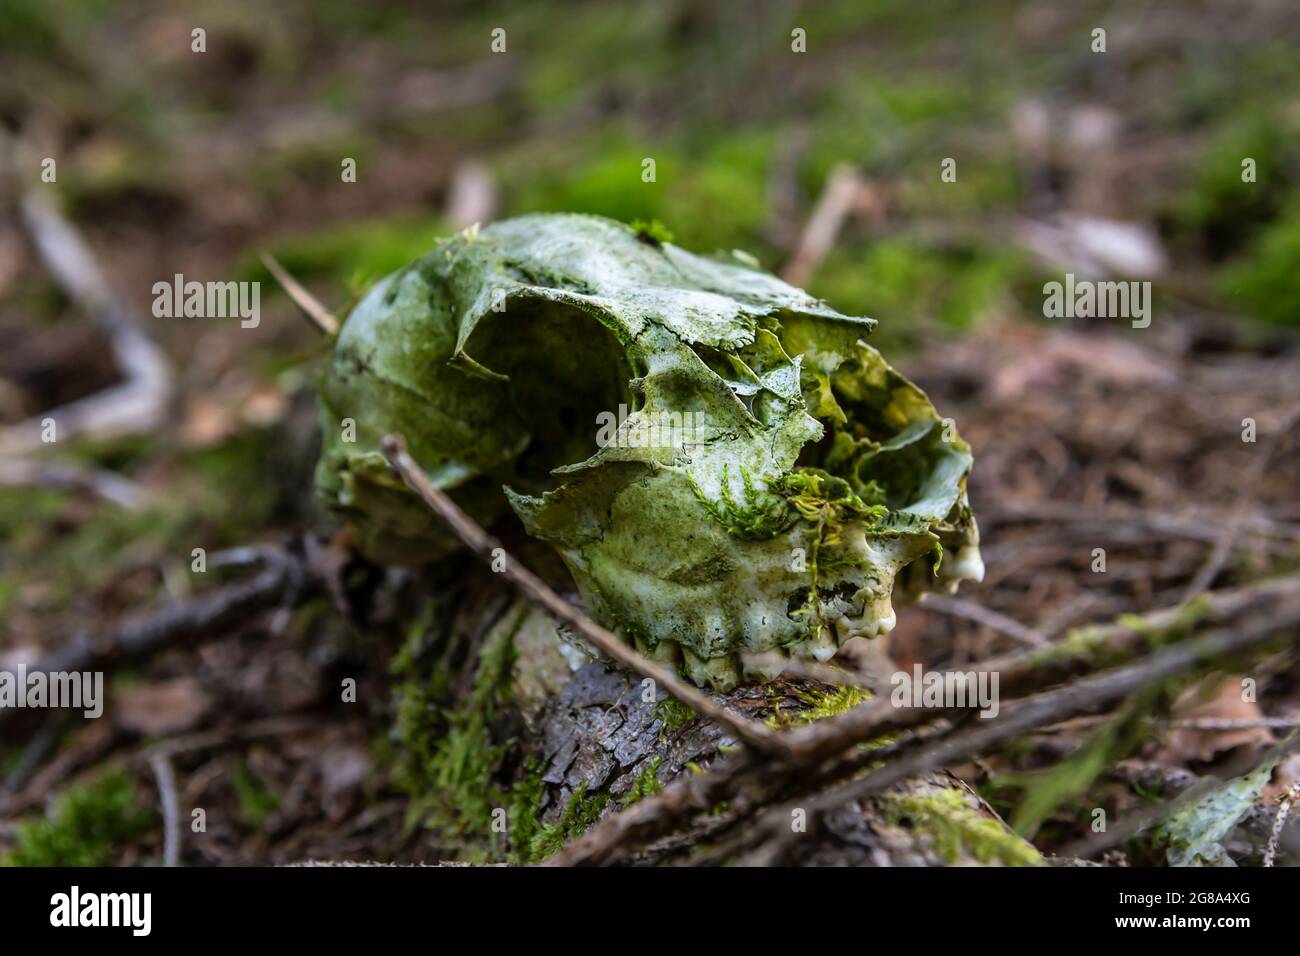 Close-up of a skull in the forest Stock Photo